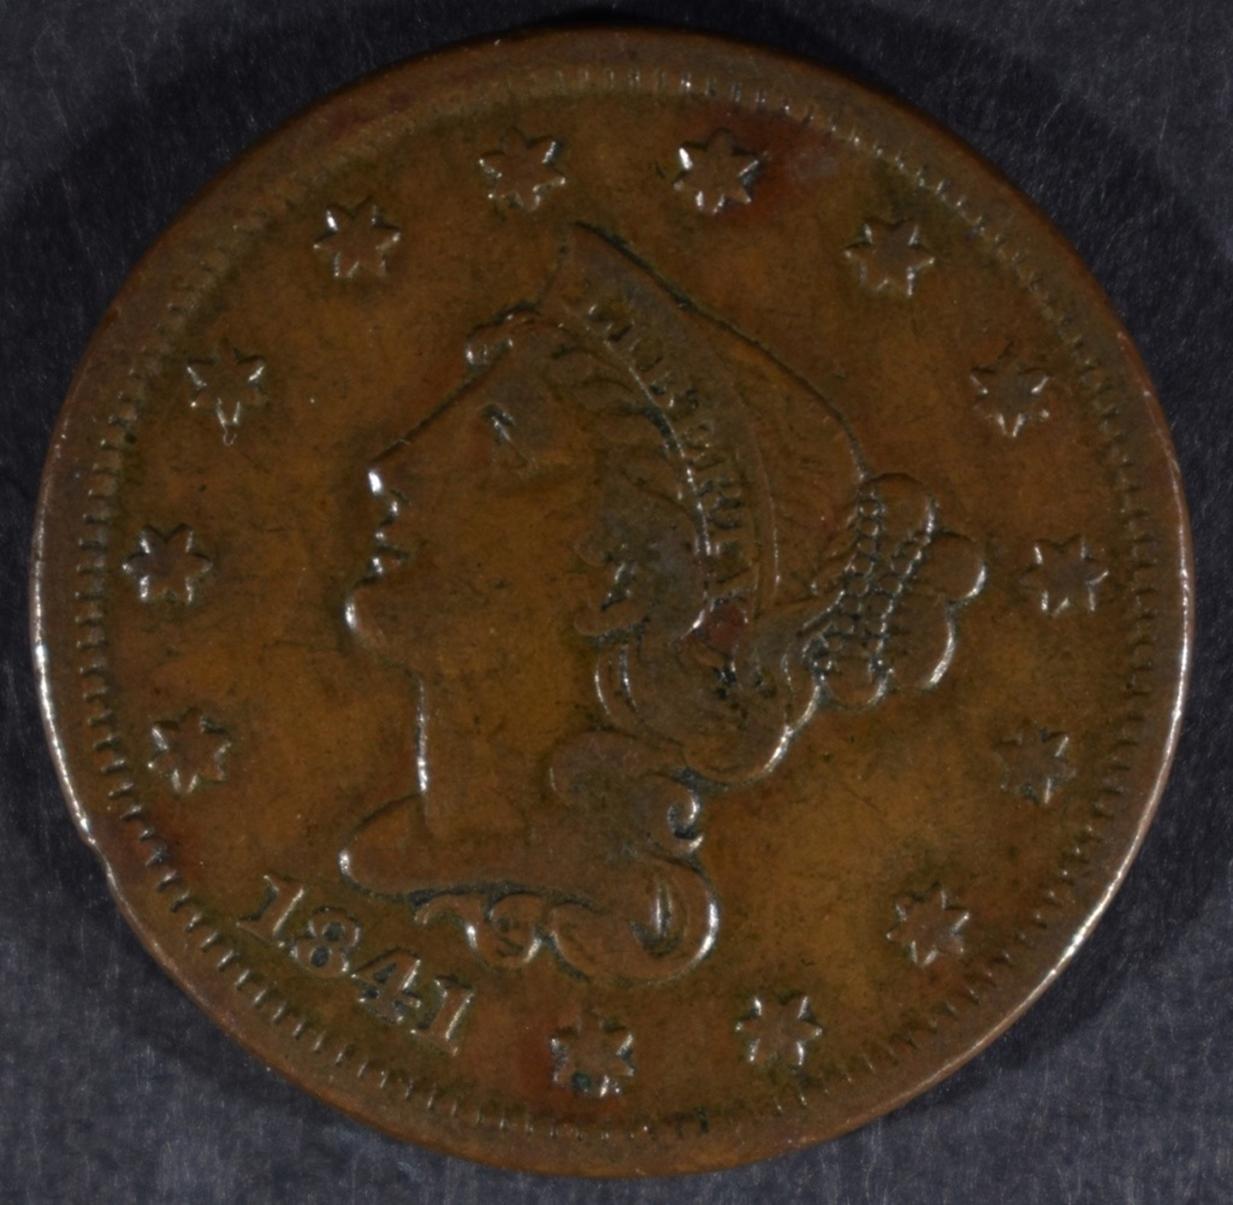 1841 LARGE CENT, VF/XF